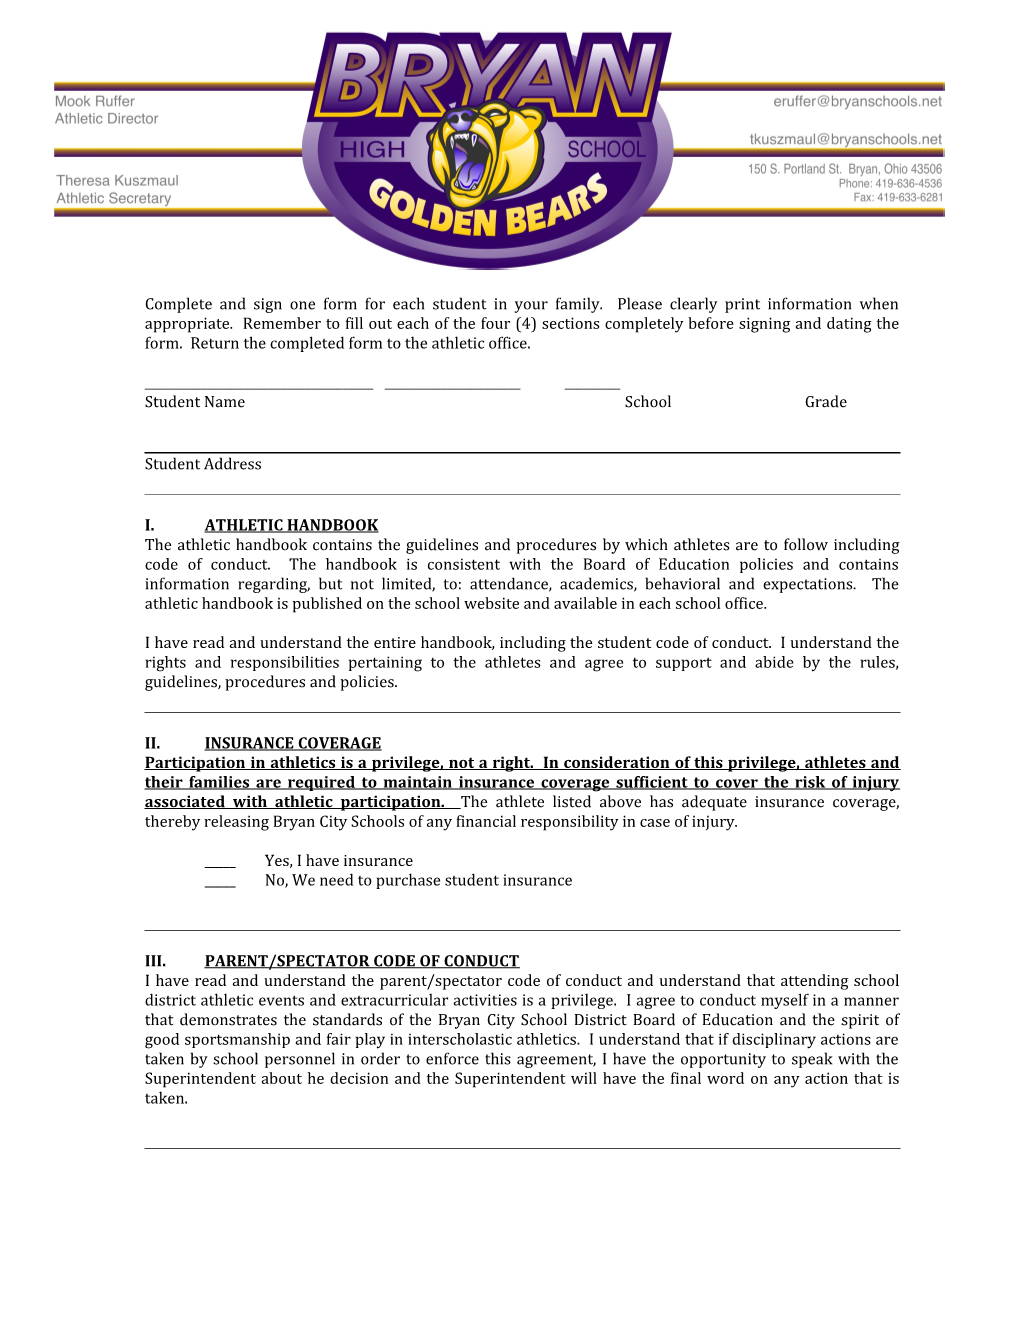 Complete and Sign One Form for Each Student in Your Family. Please Clearly Print Information